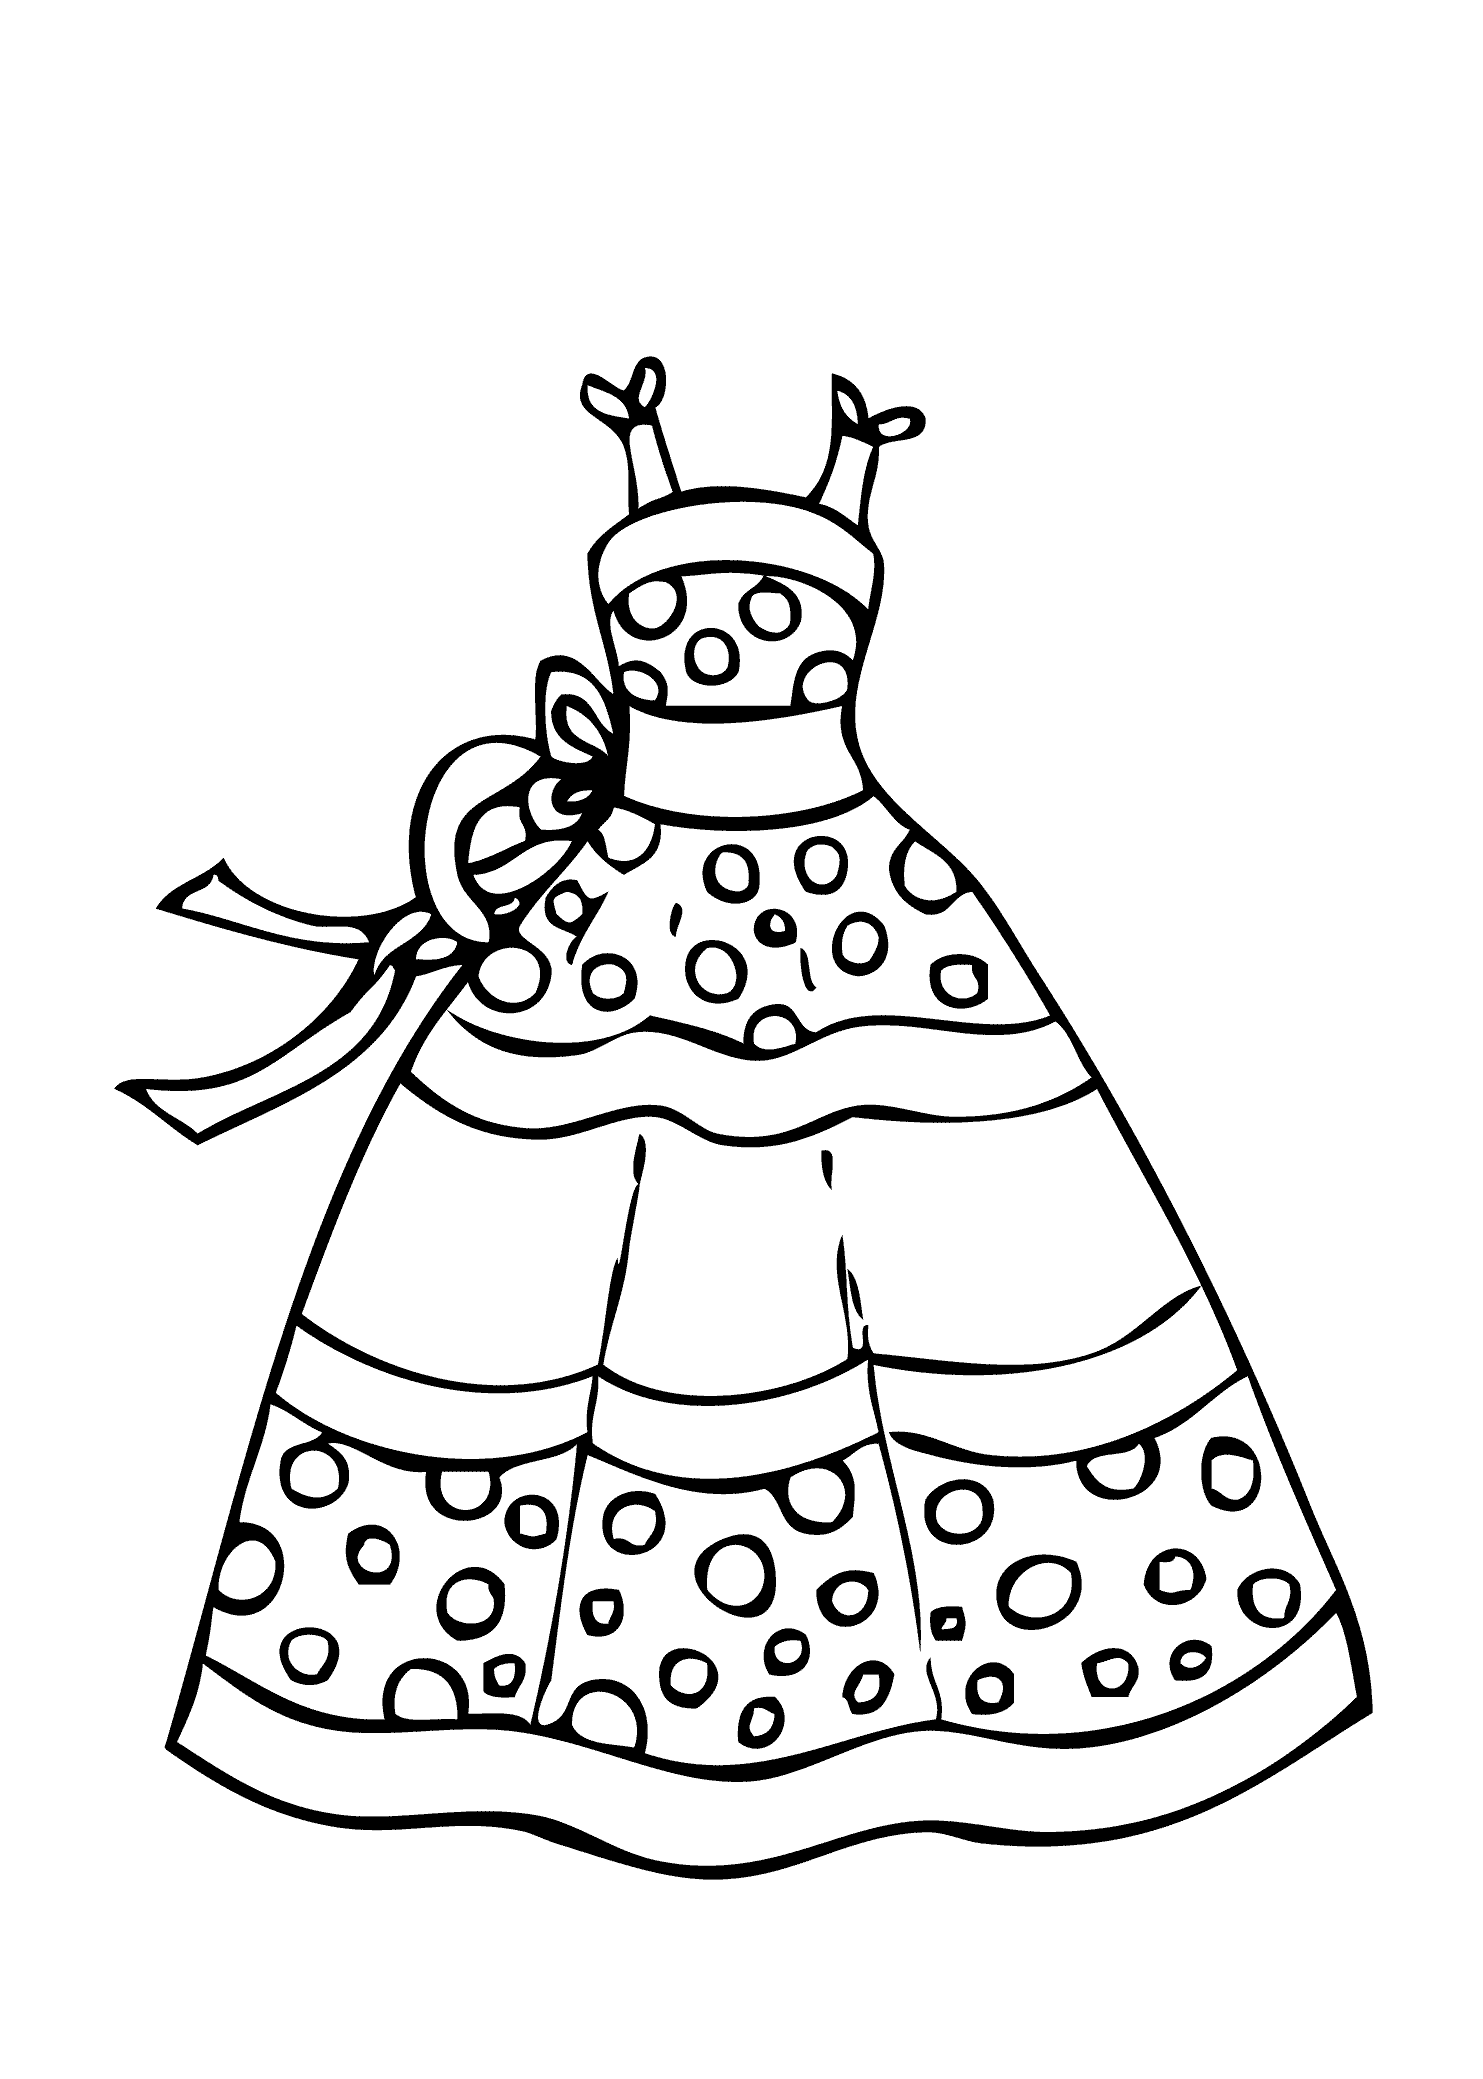 coloring page dress dress coloring pages free download on clipartmag page dress coloring 